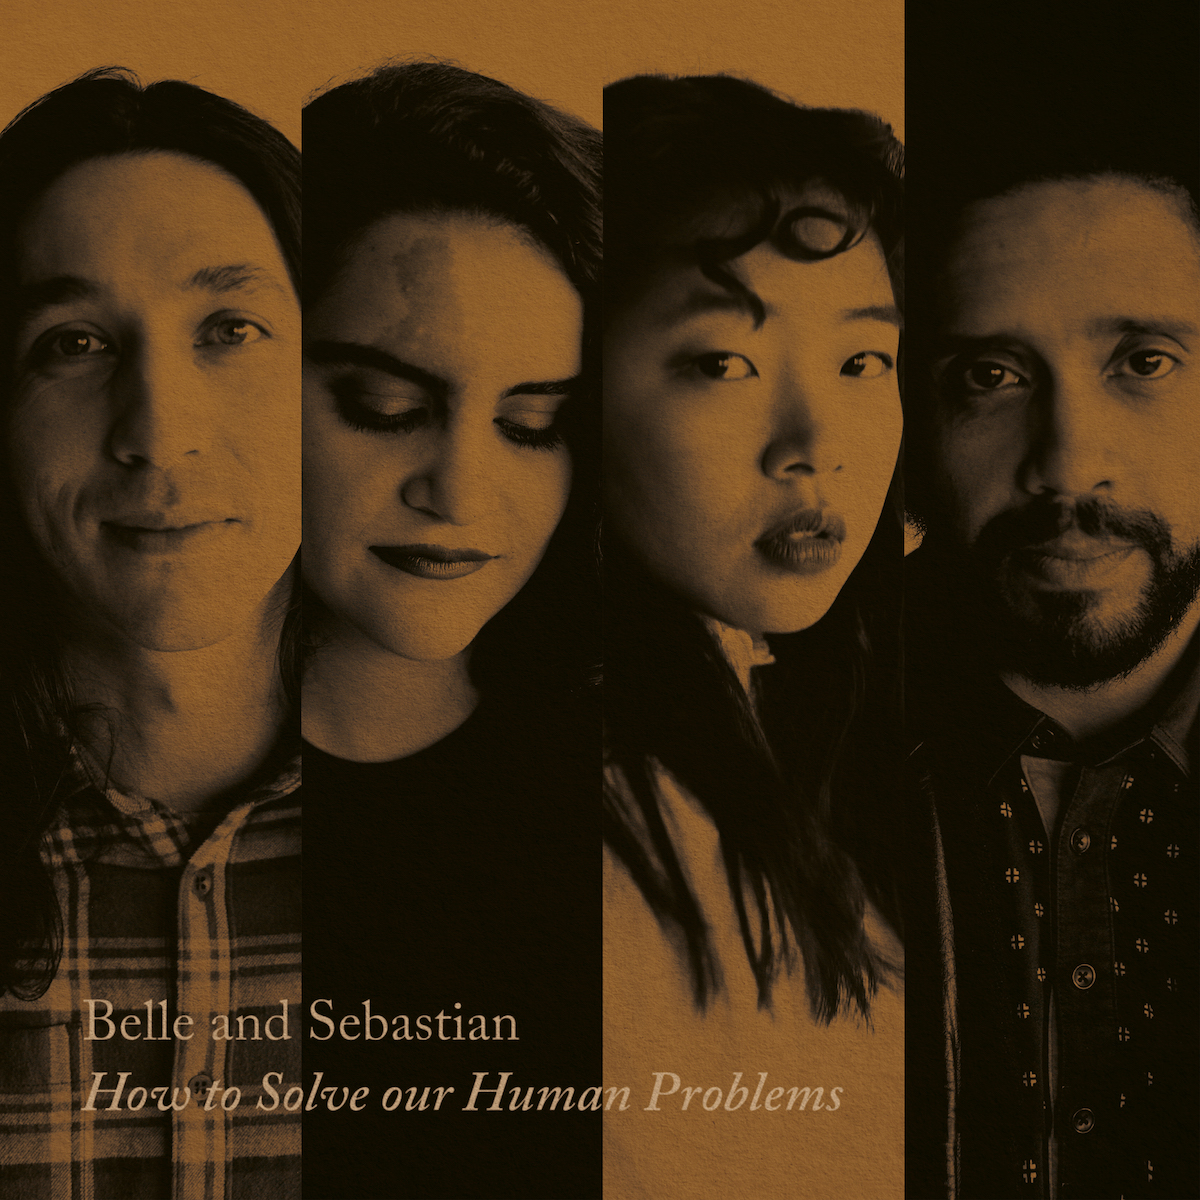 Belle and Sebastian Announce <i>How to Solve Our Human Problems</i> EP Trilogy, Release “I’ll Be Your Pilot”” title=”4000x4000px_EP1Cover-copy-1507641763″ data-original-id=”261742″ data-adjusted-id=”261742″ class=”sm_size_full_width sm_alignment_center ” data-image-source=”getty” /><div class=